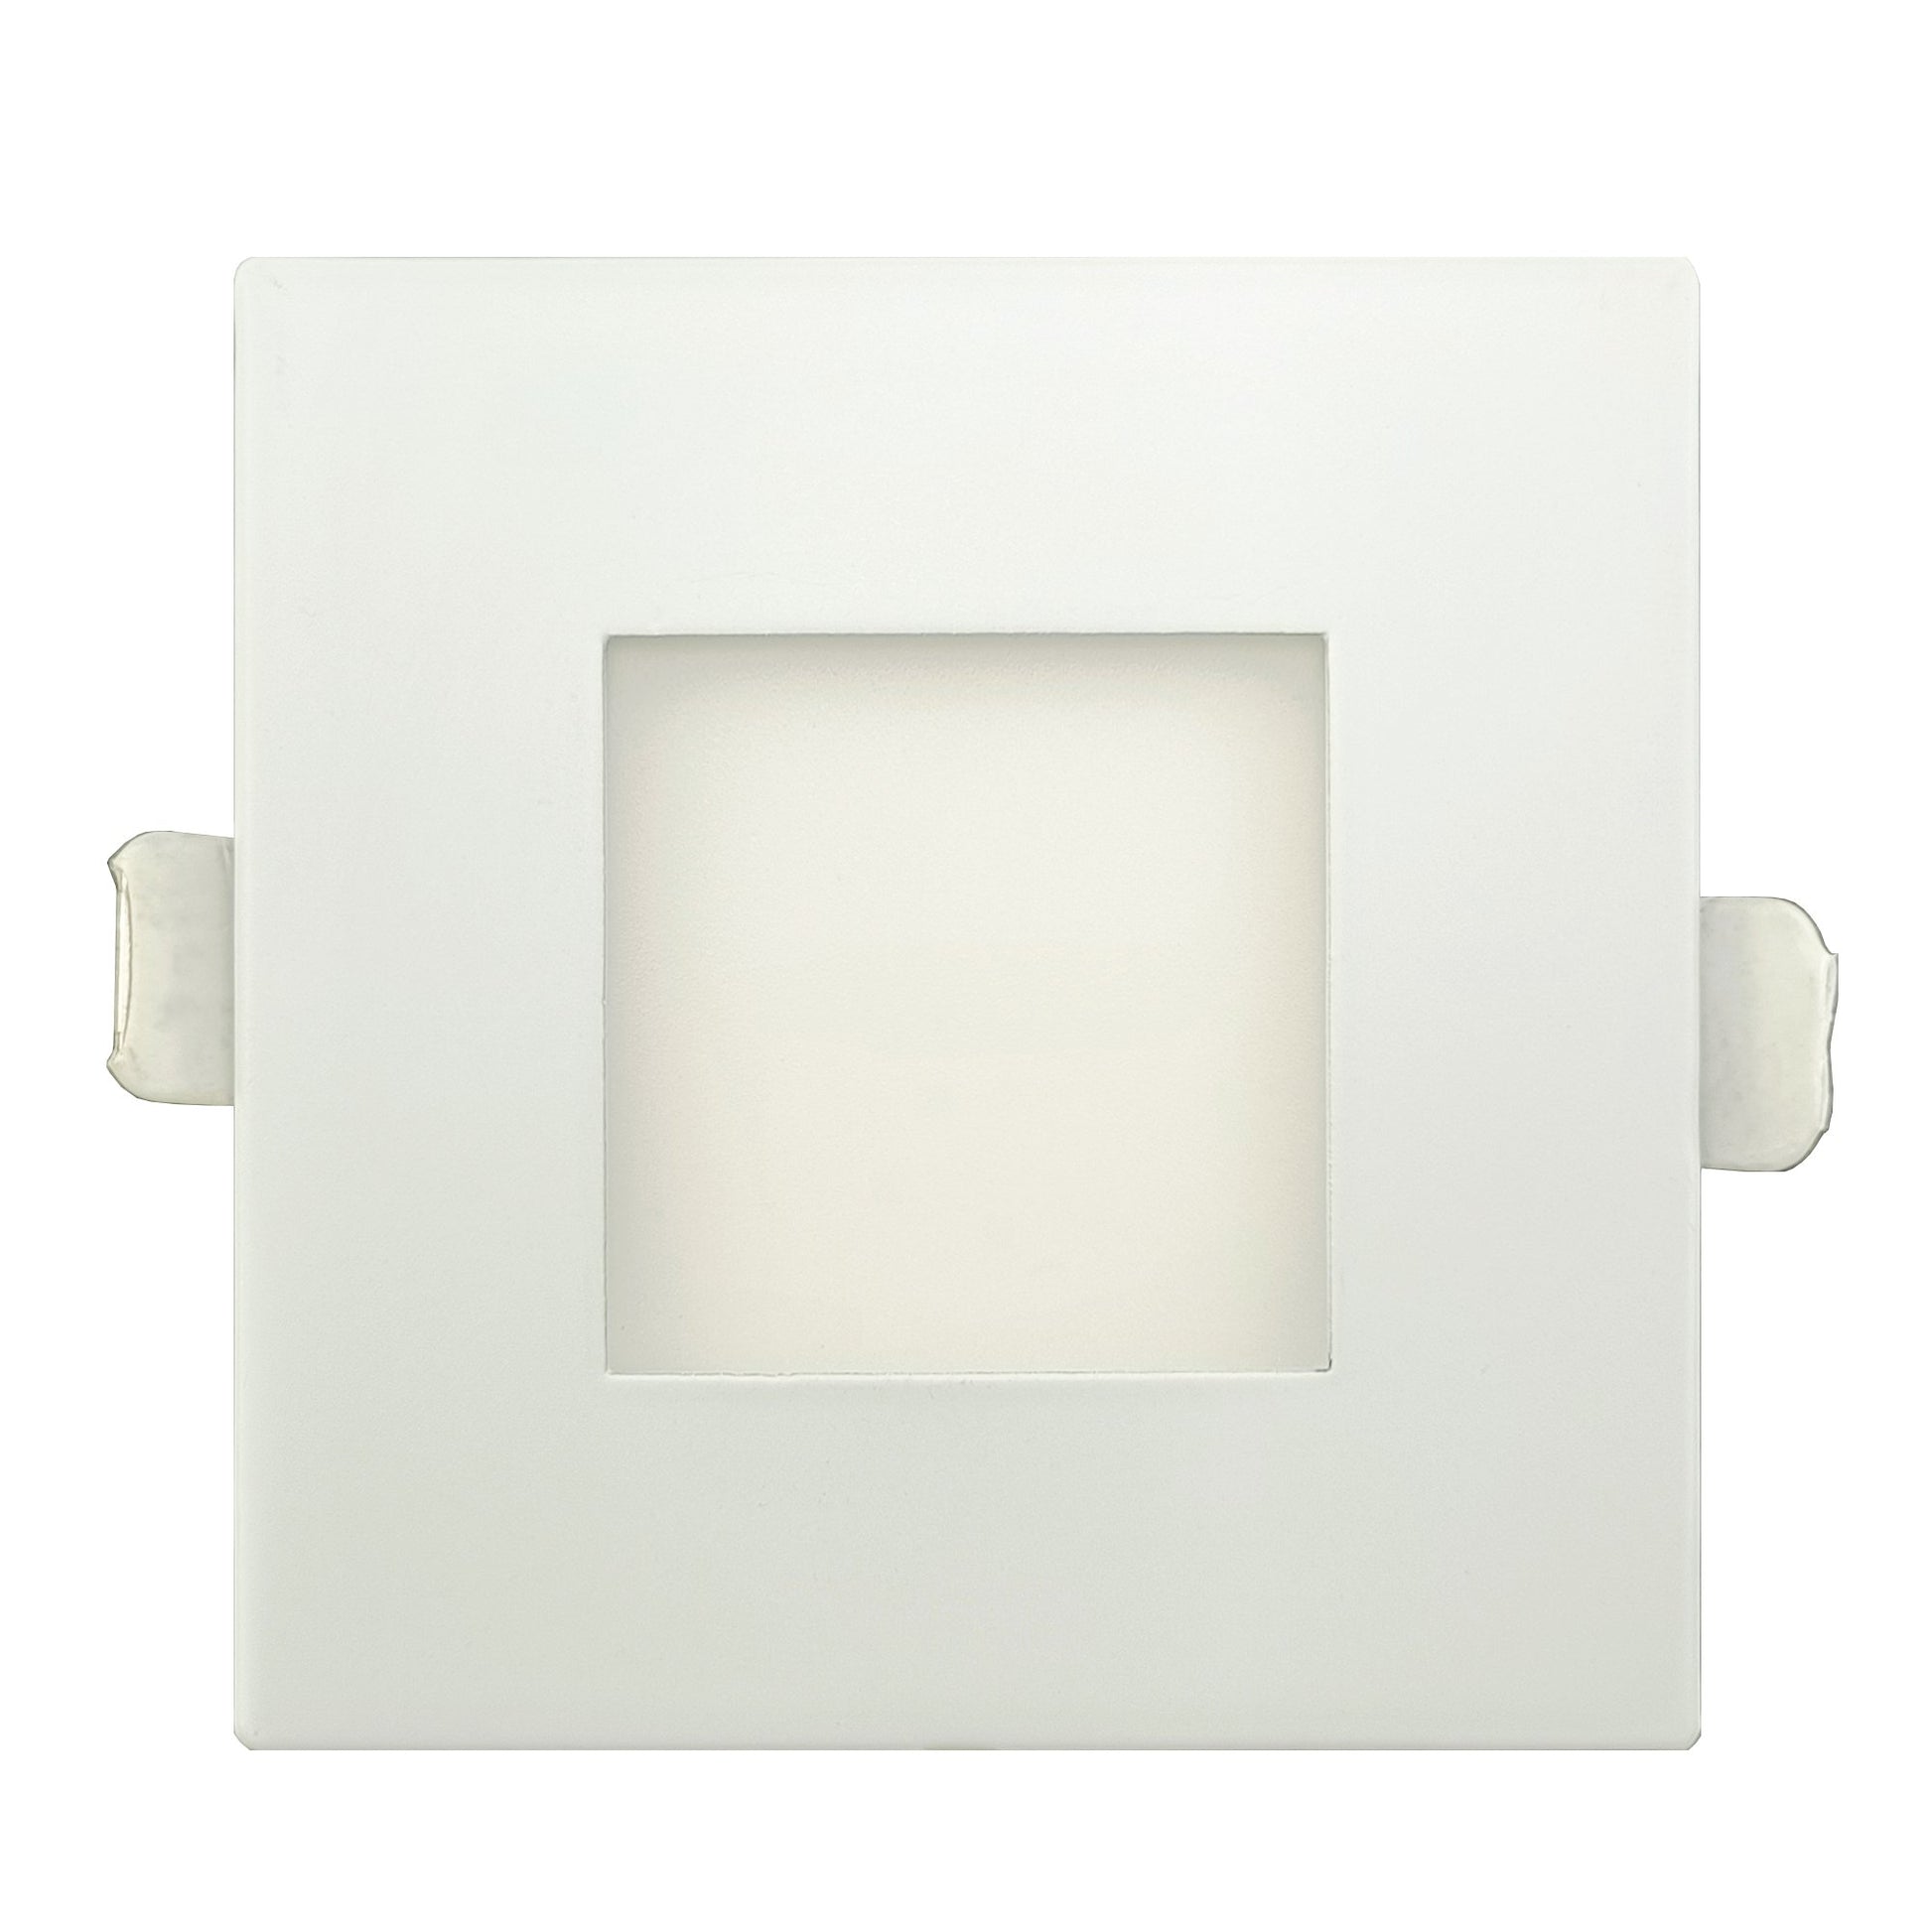 GDL-G97021Goodlite G-97021 3" 8W LED Square Recessed Slim Spotlight Selectable CCT Fire Rated